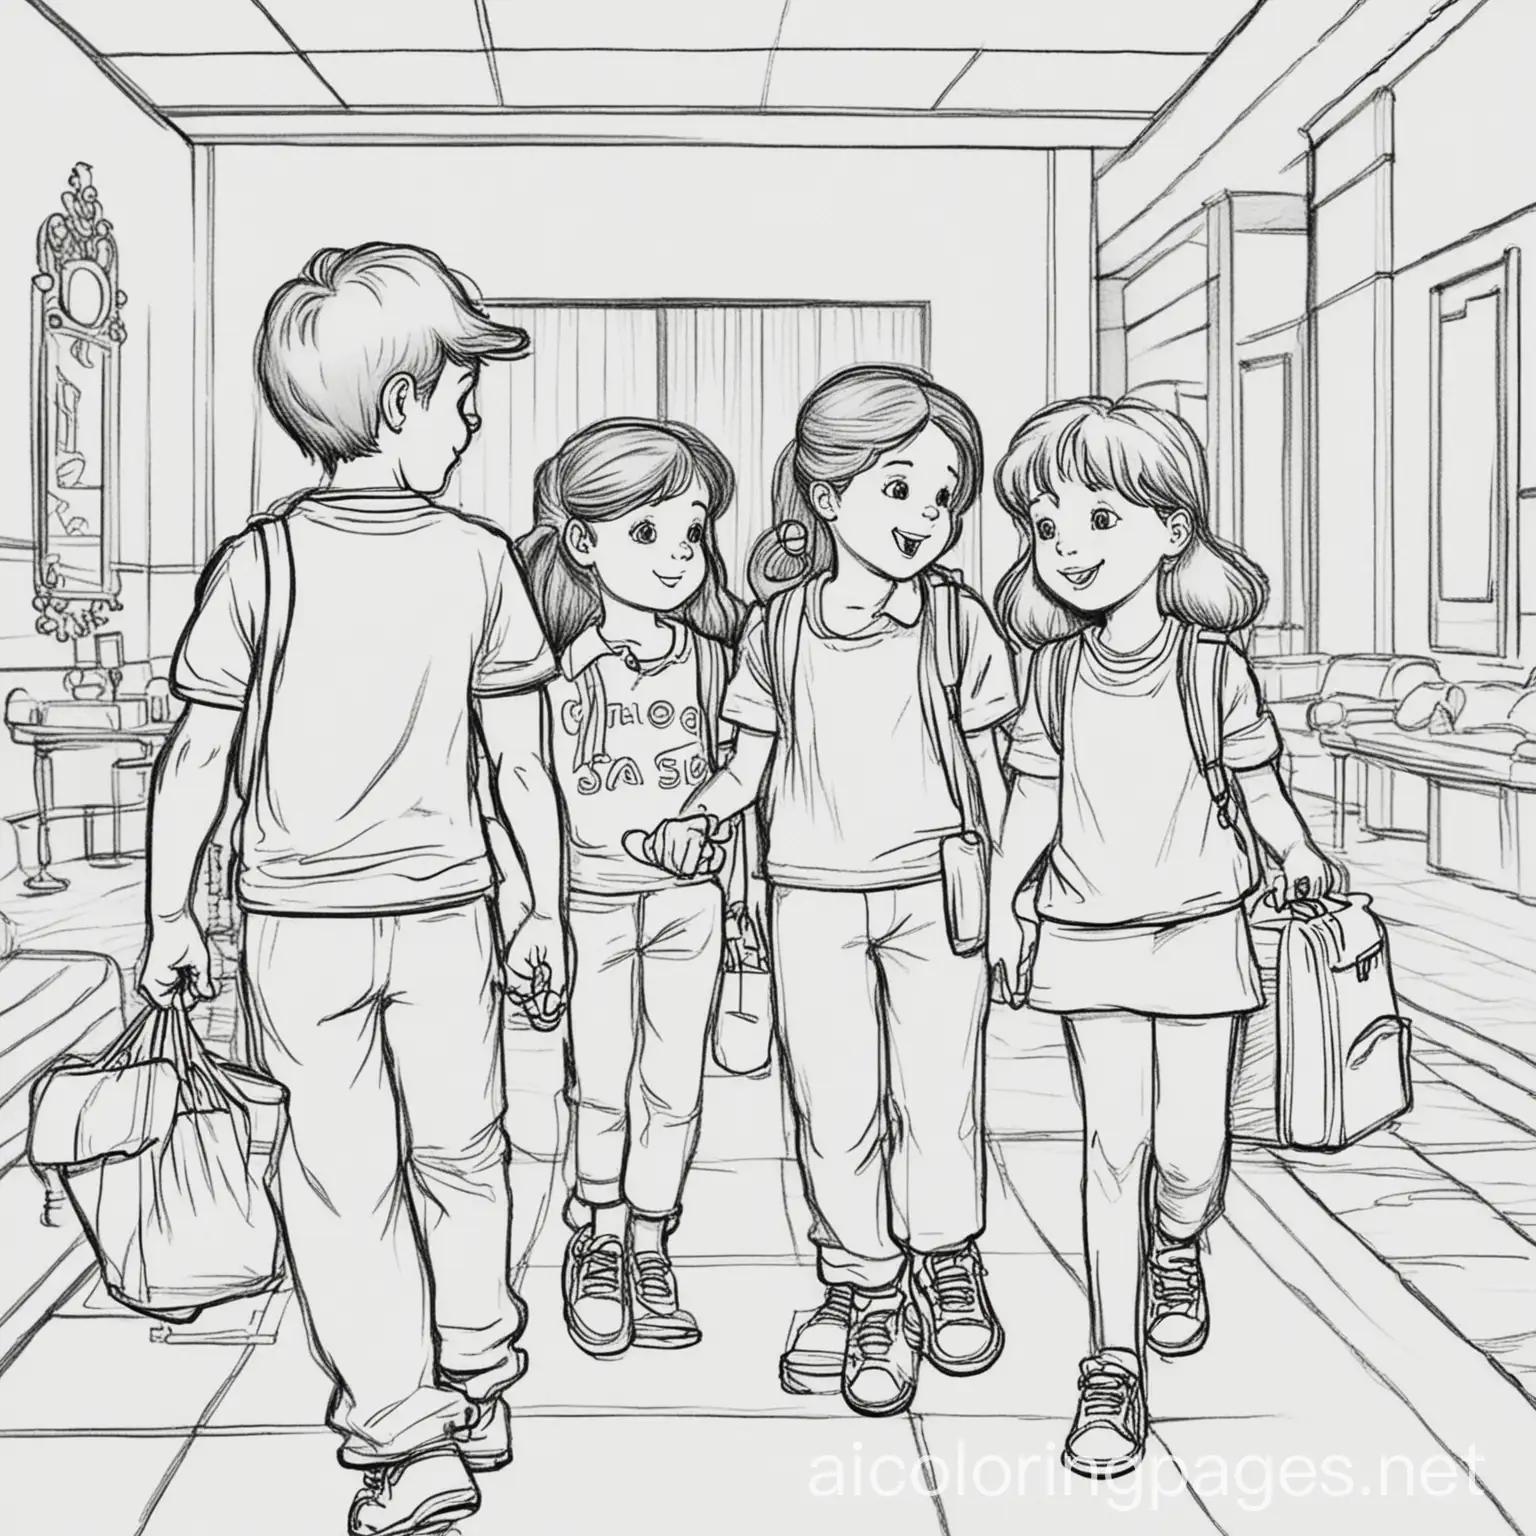 kids checking in to hotel
, Coloring Page, black and white, line art, white background, Simplicity, Ample White Space. The background of the coloring page is plain white to make it easy for young children to color within the lines. The outlines of all the subjects are easy to distinguish, making it simple for kids to color without too much difficulty